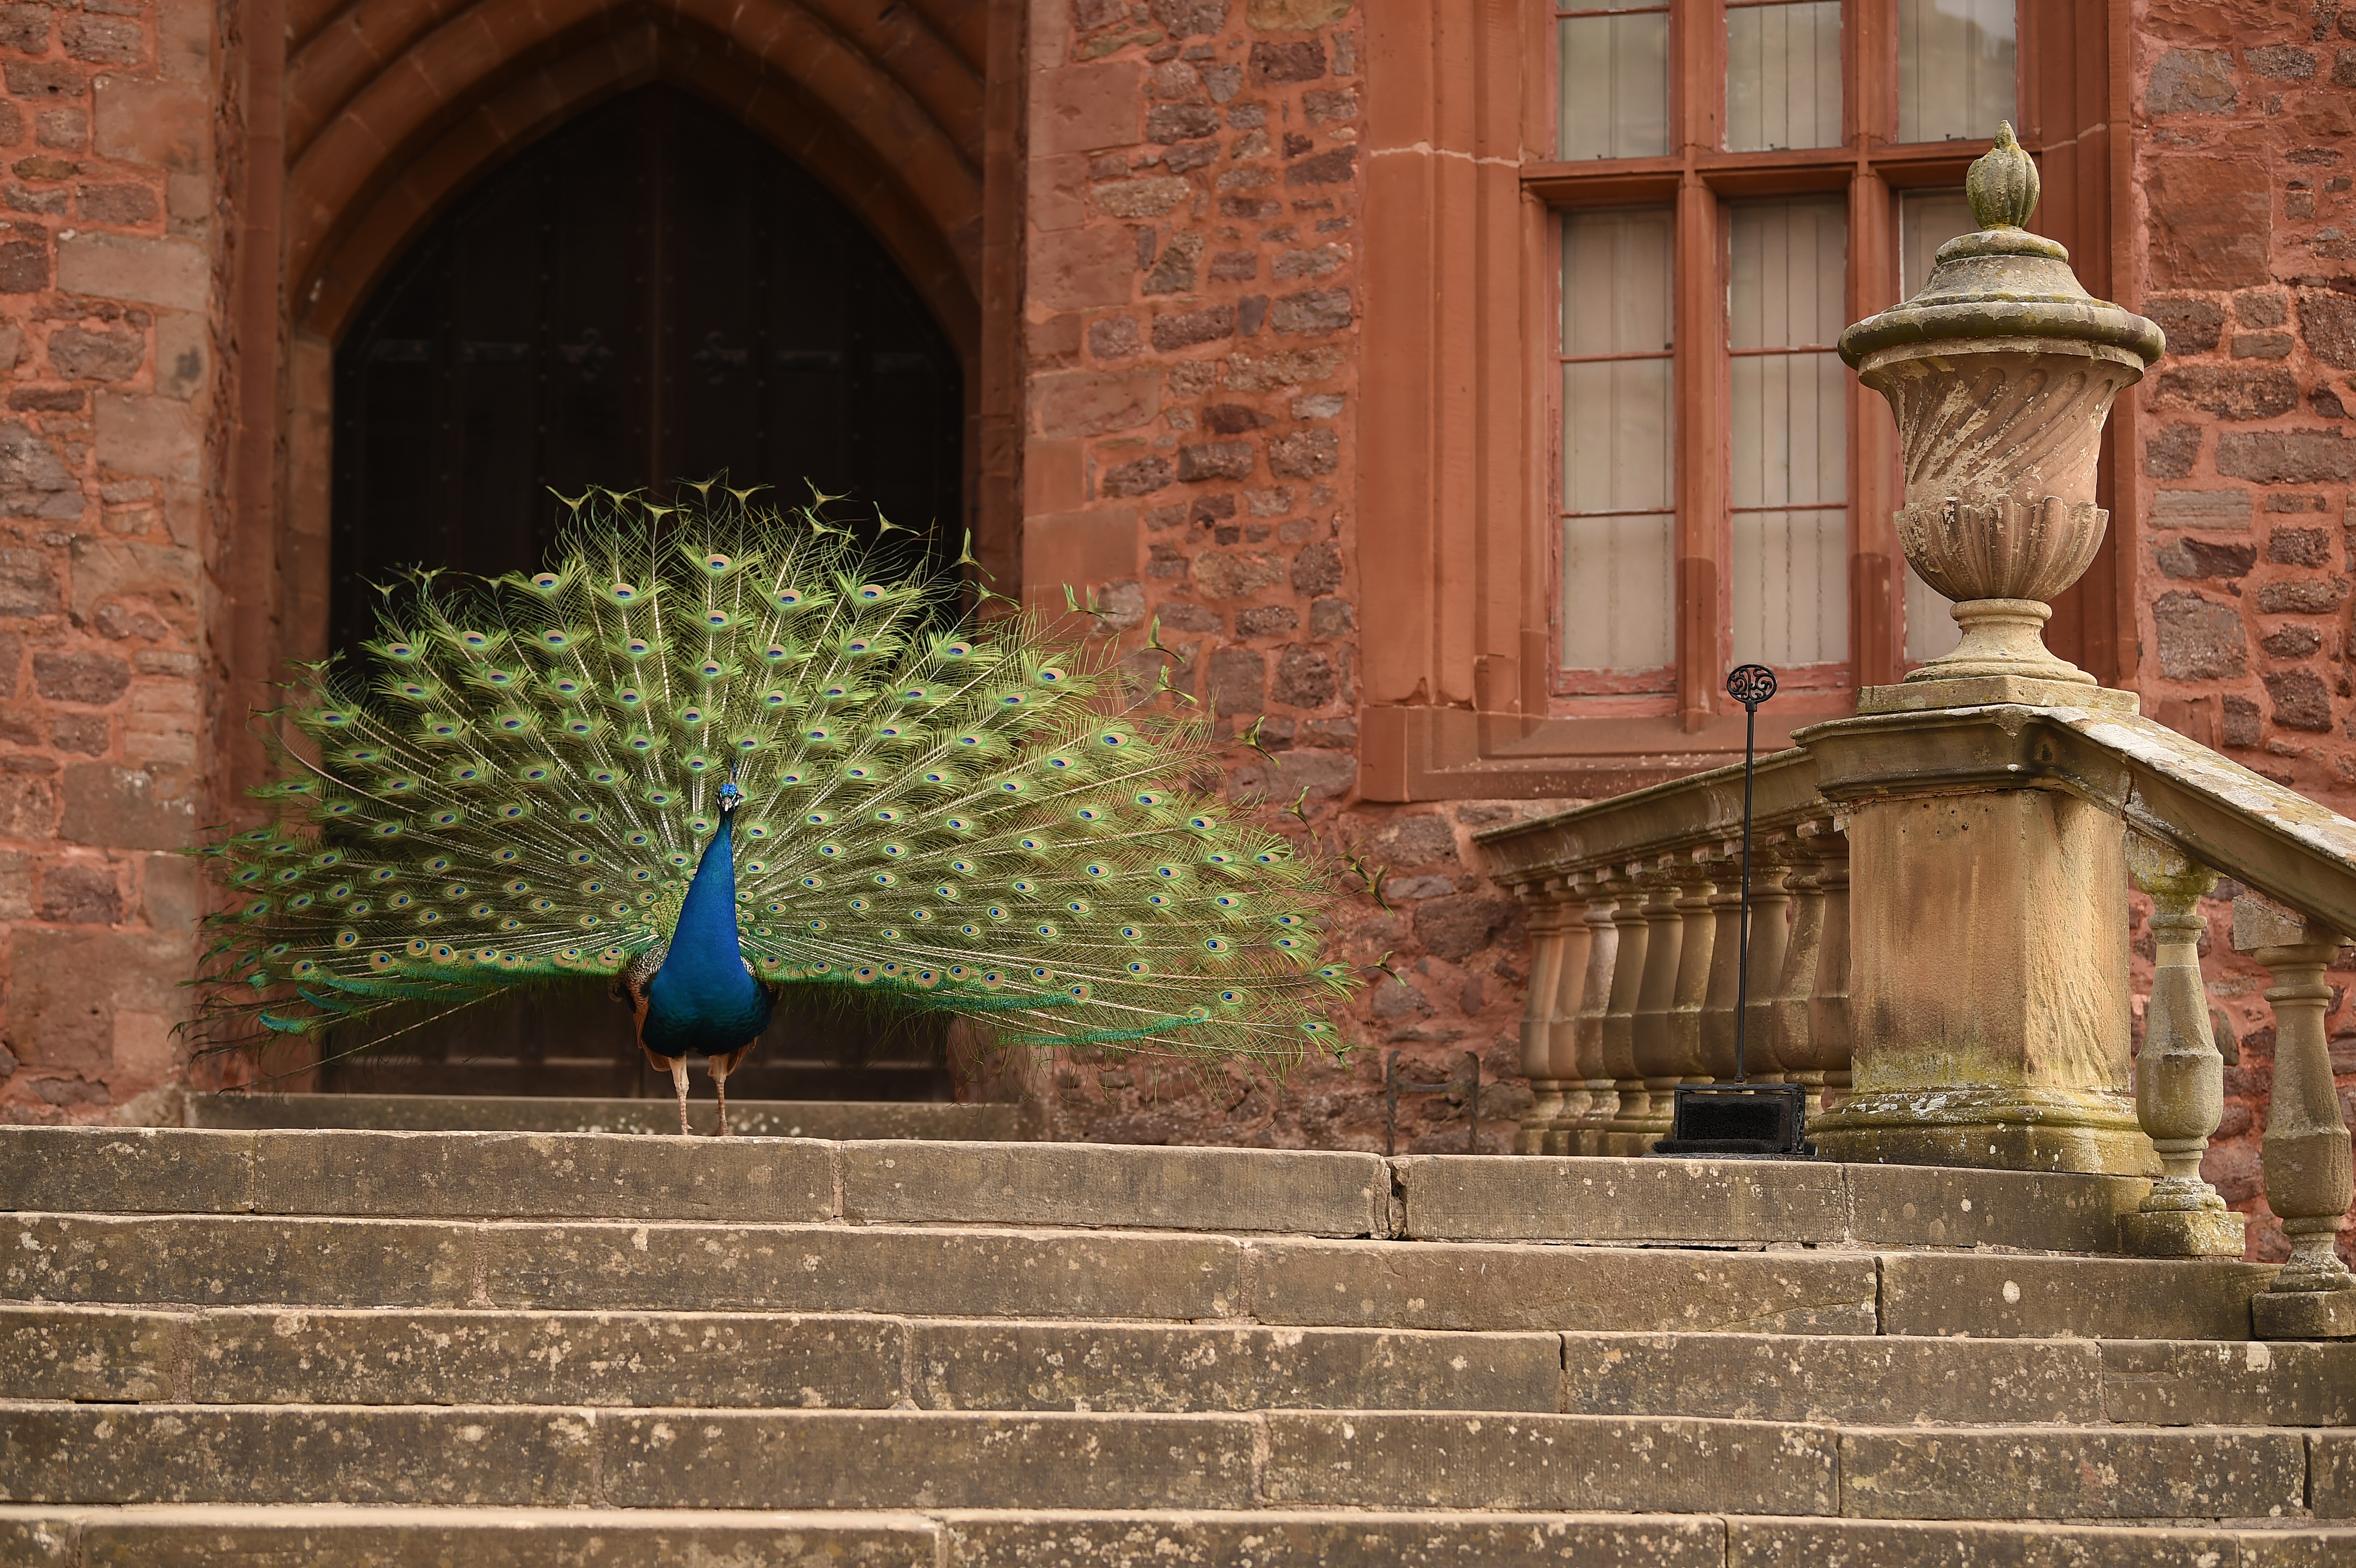 A peacock displaying his tail feathers at Powis Castle, Wales